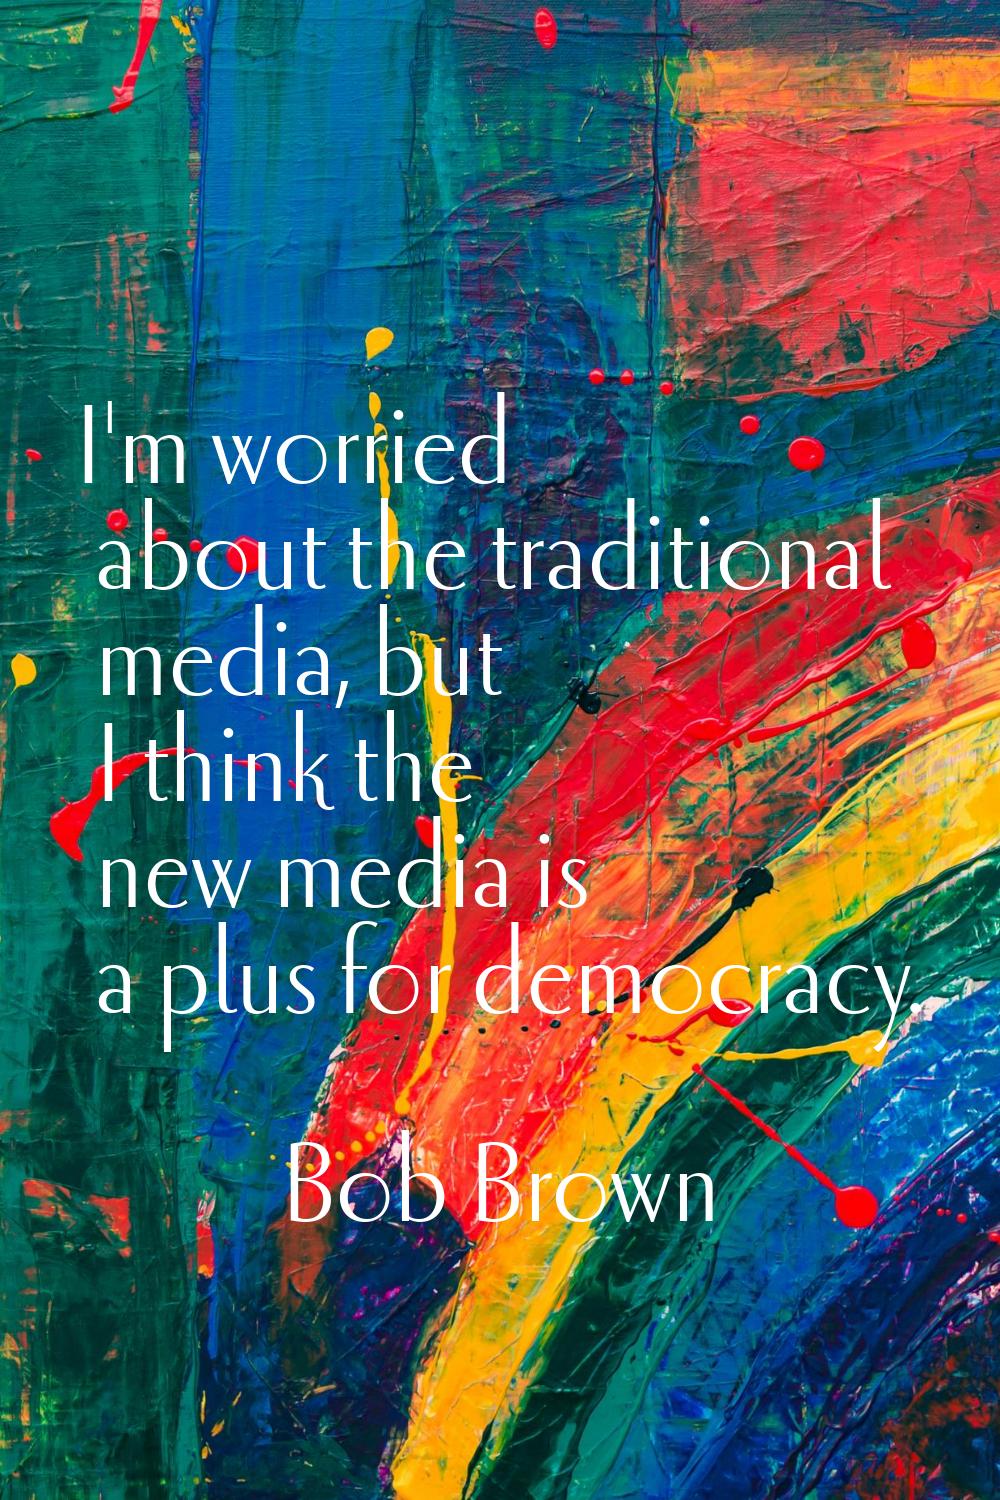 I'm worried about the traditional media, but I think the new media is a plus for democracy.